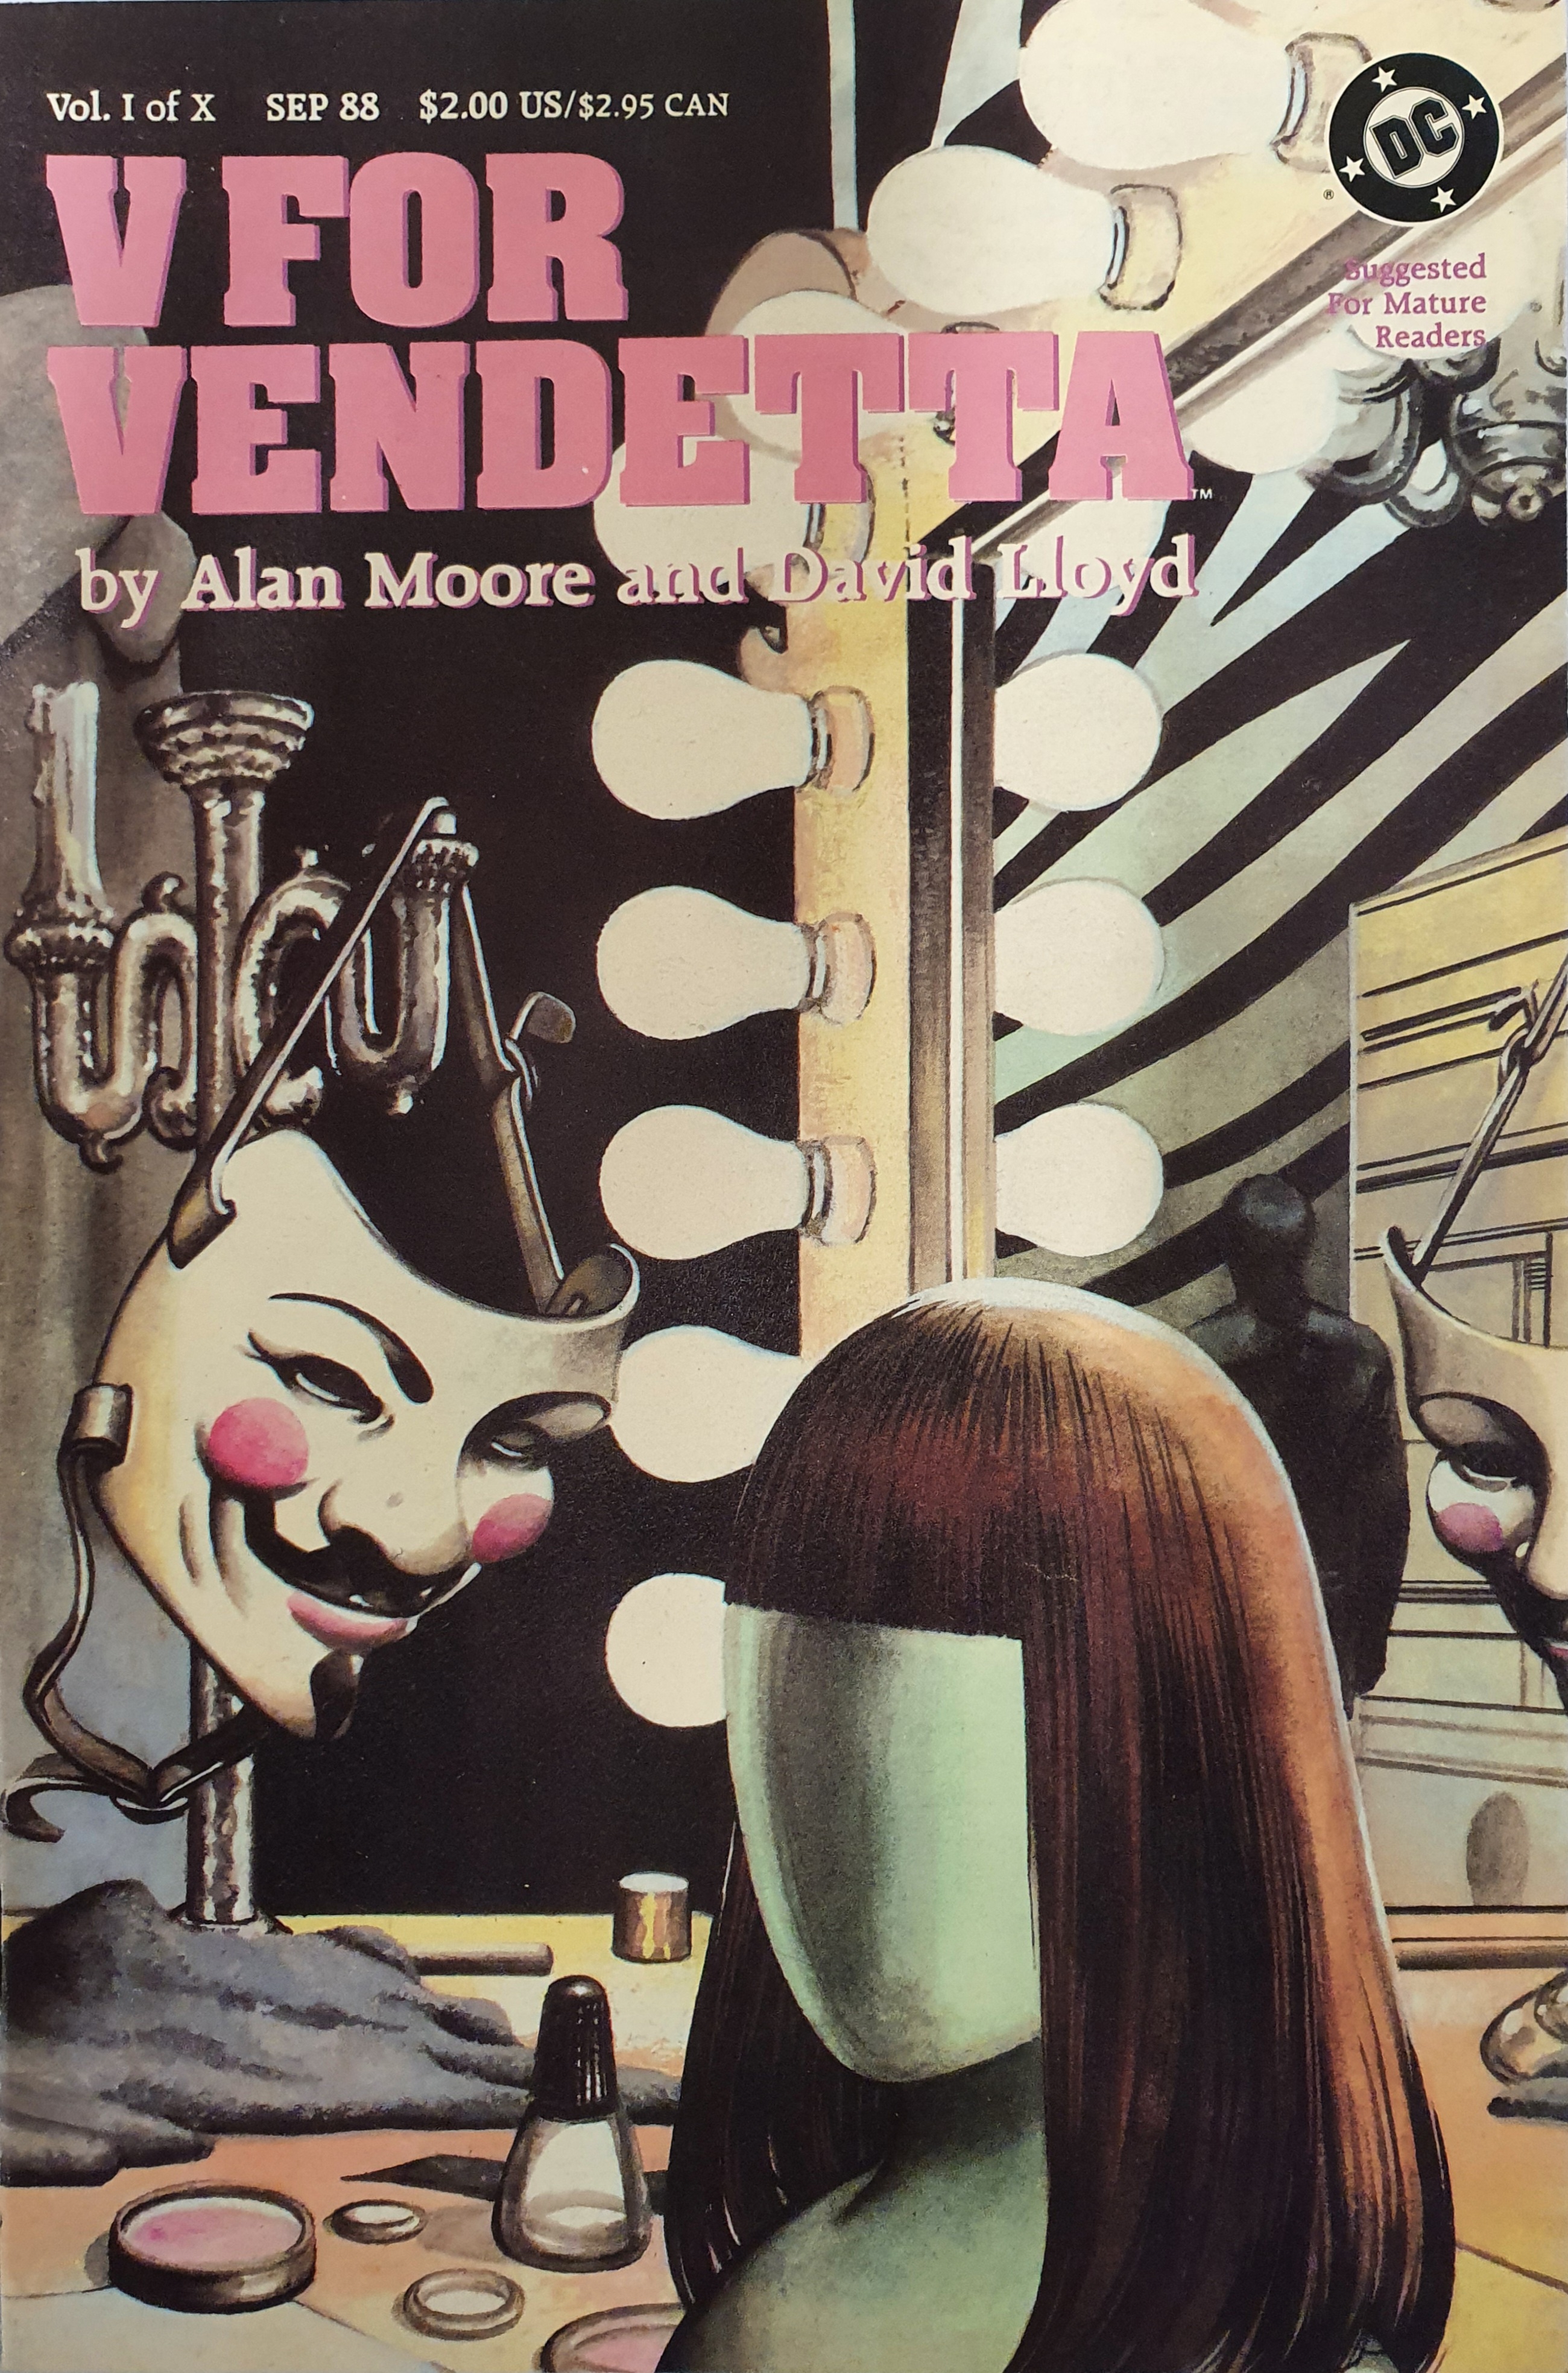 WITHDRAWN V For Vendetta - Vol 1 (Sep 1988) first issue by Alan Moore and David Lloyd.